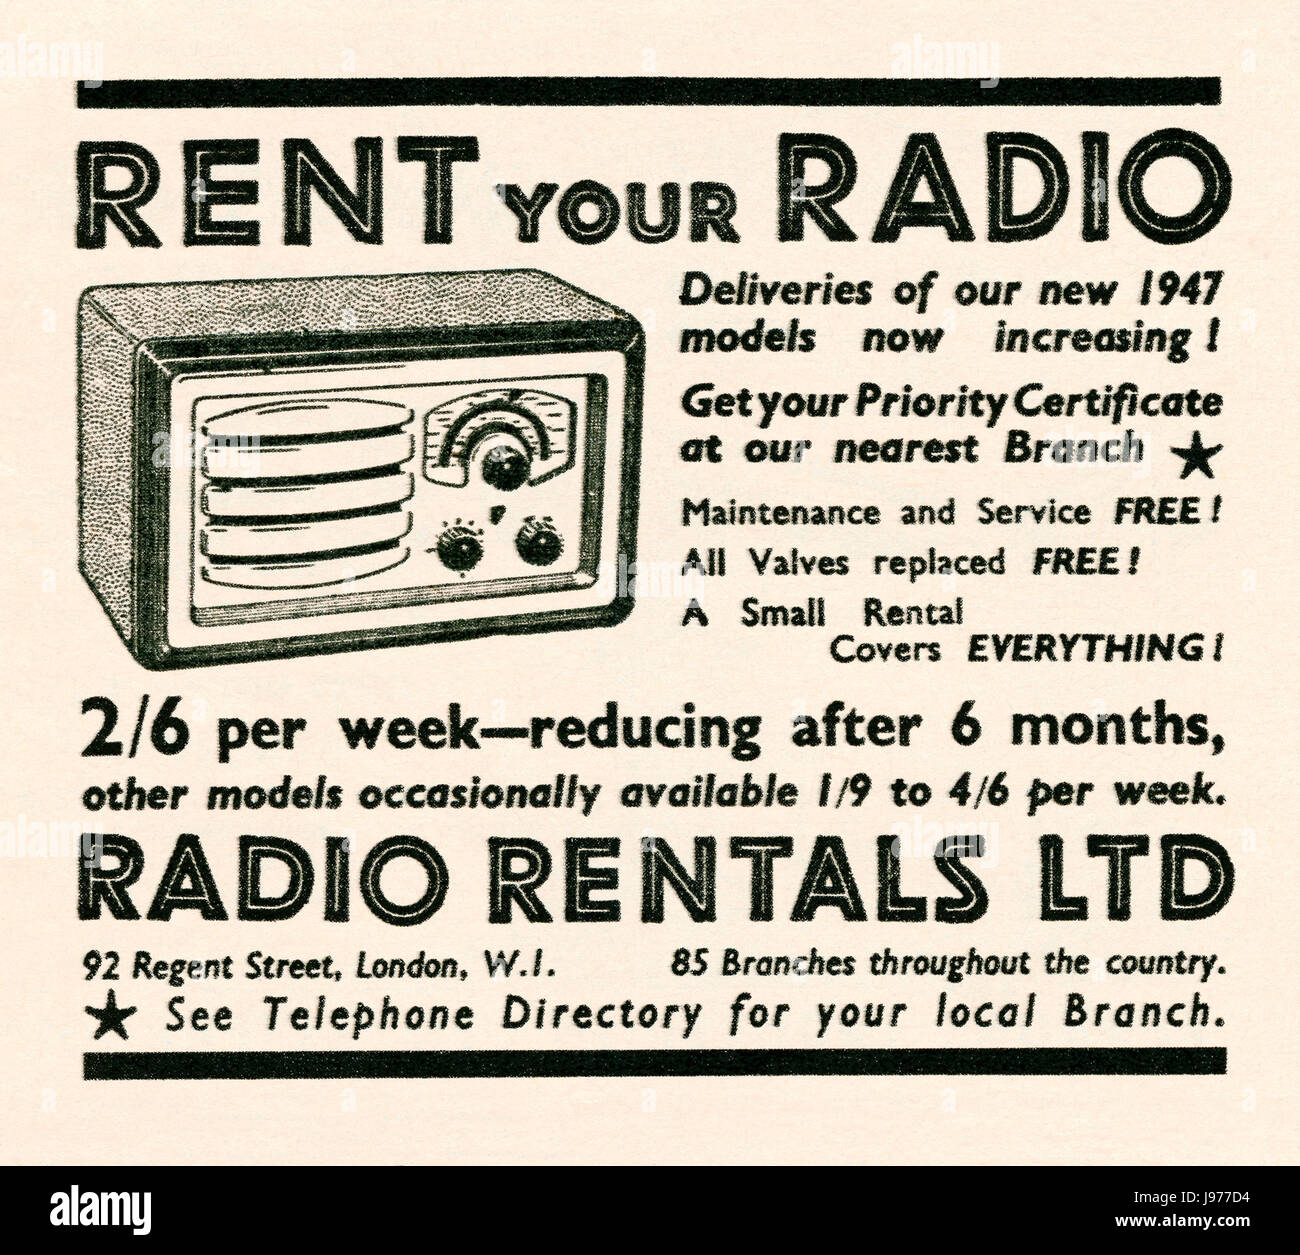 An advert for Radio Rentals for renting your radio - it appeared in a magazine published in the UK in 1947 Stock Photo